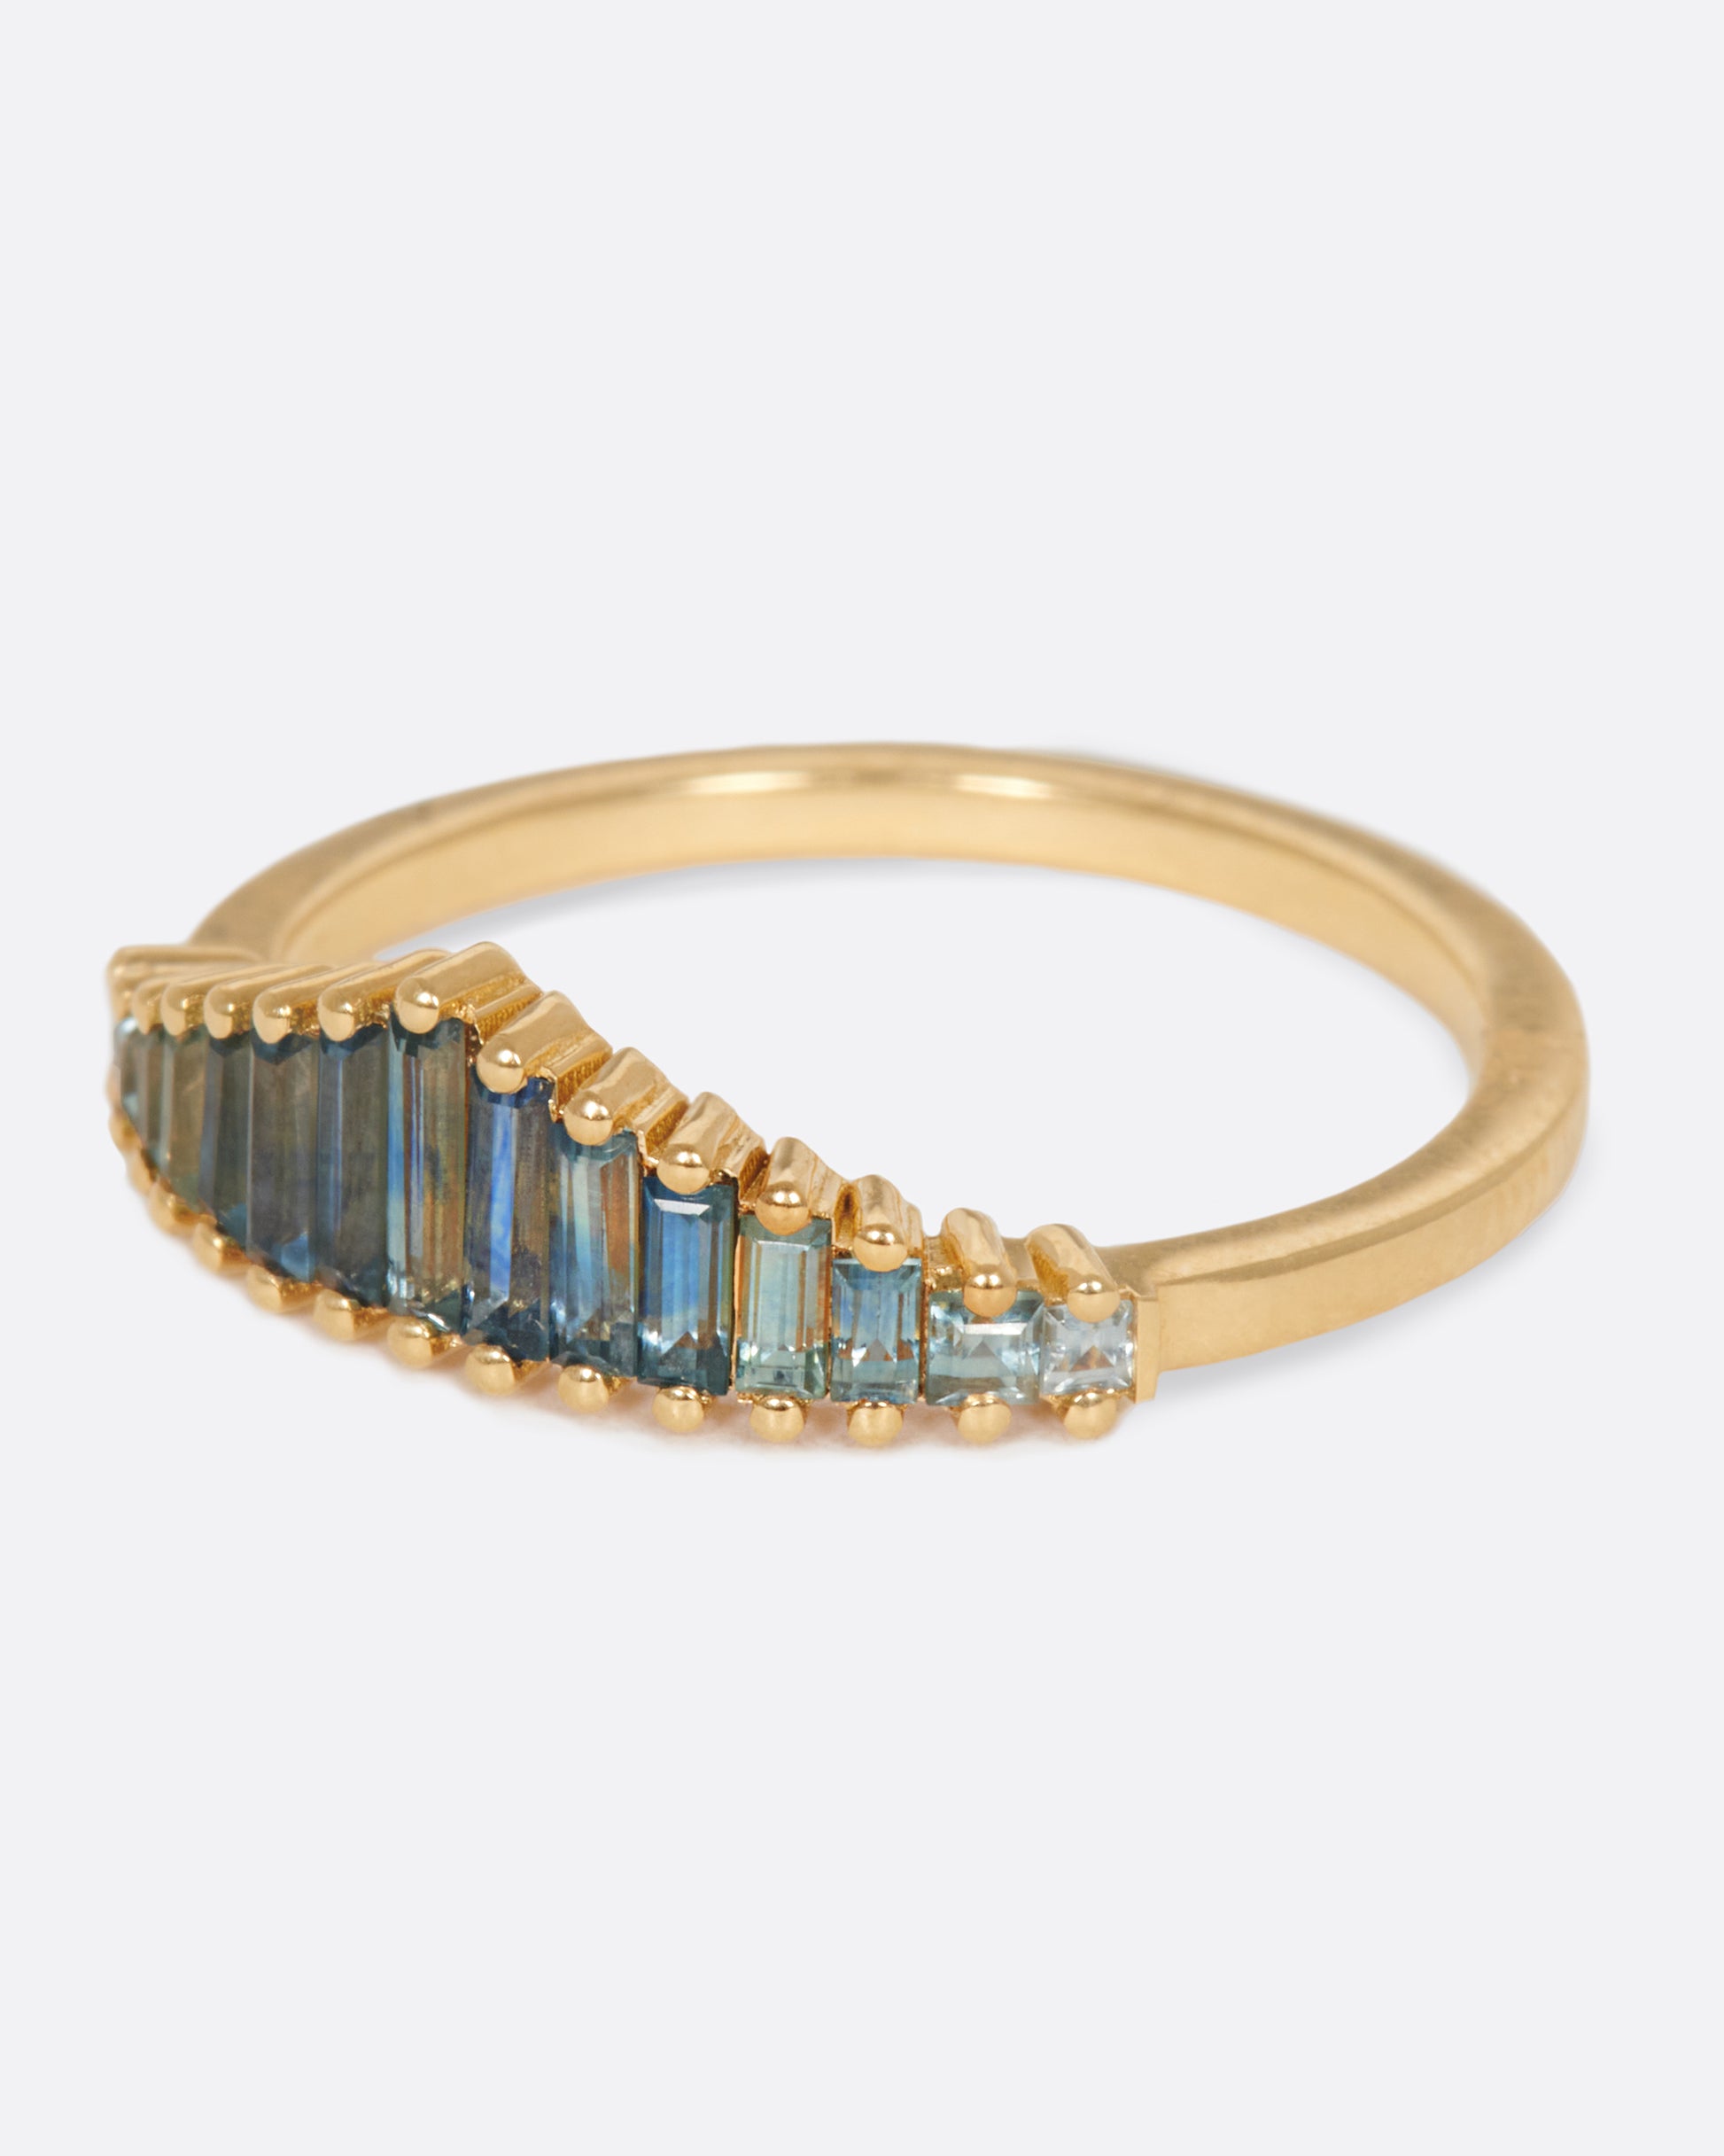 A crown ring covered in teal blue sapphire baguettes.